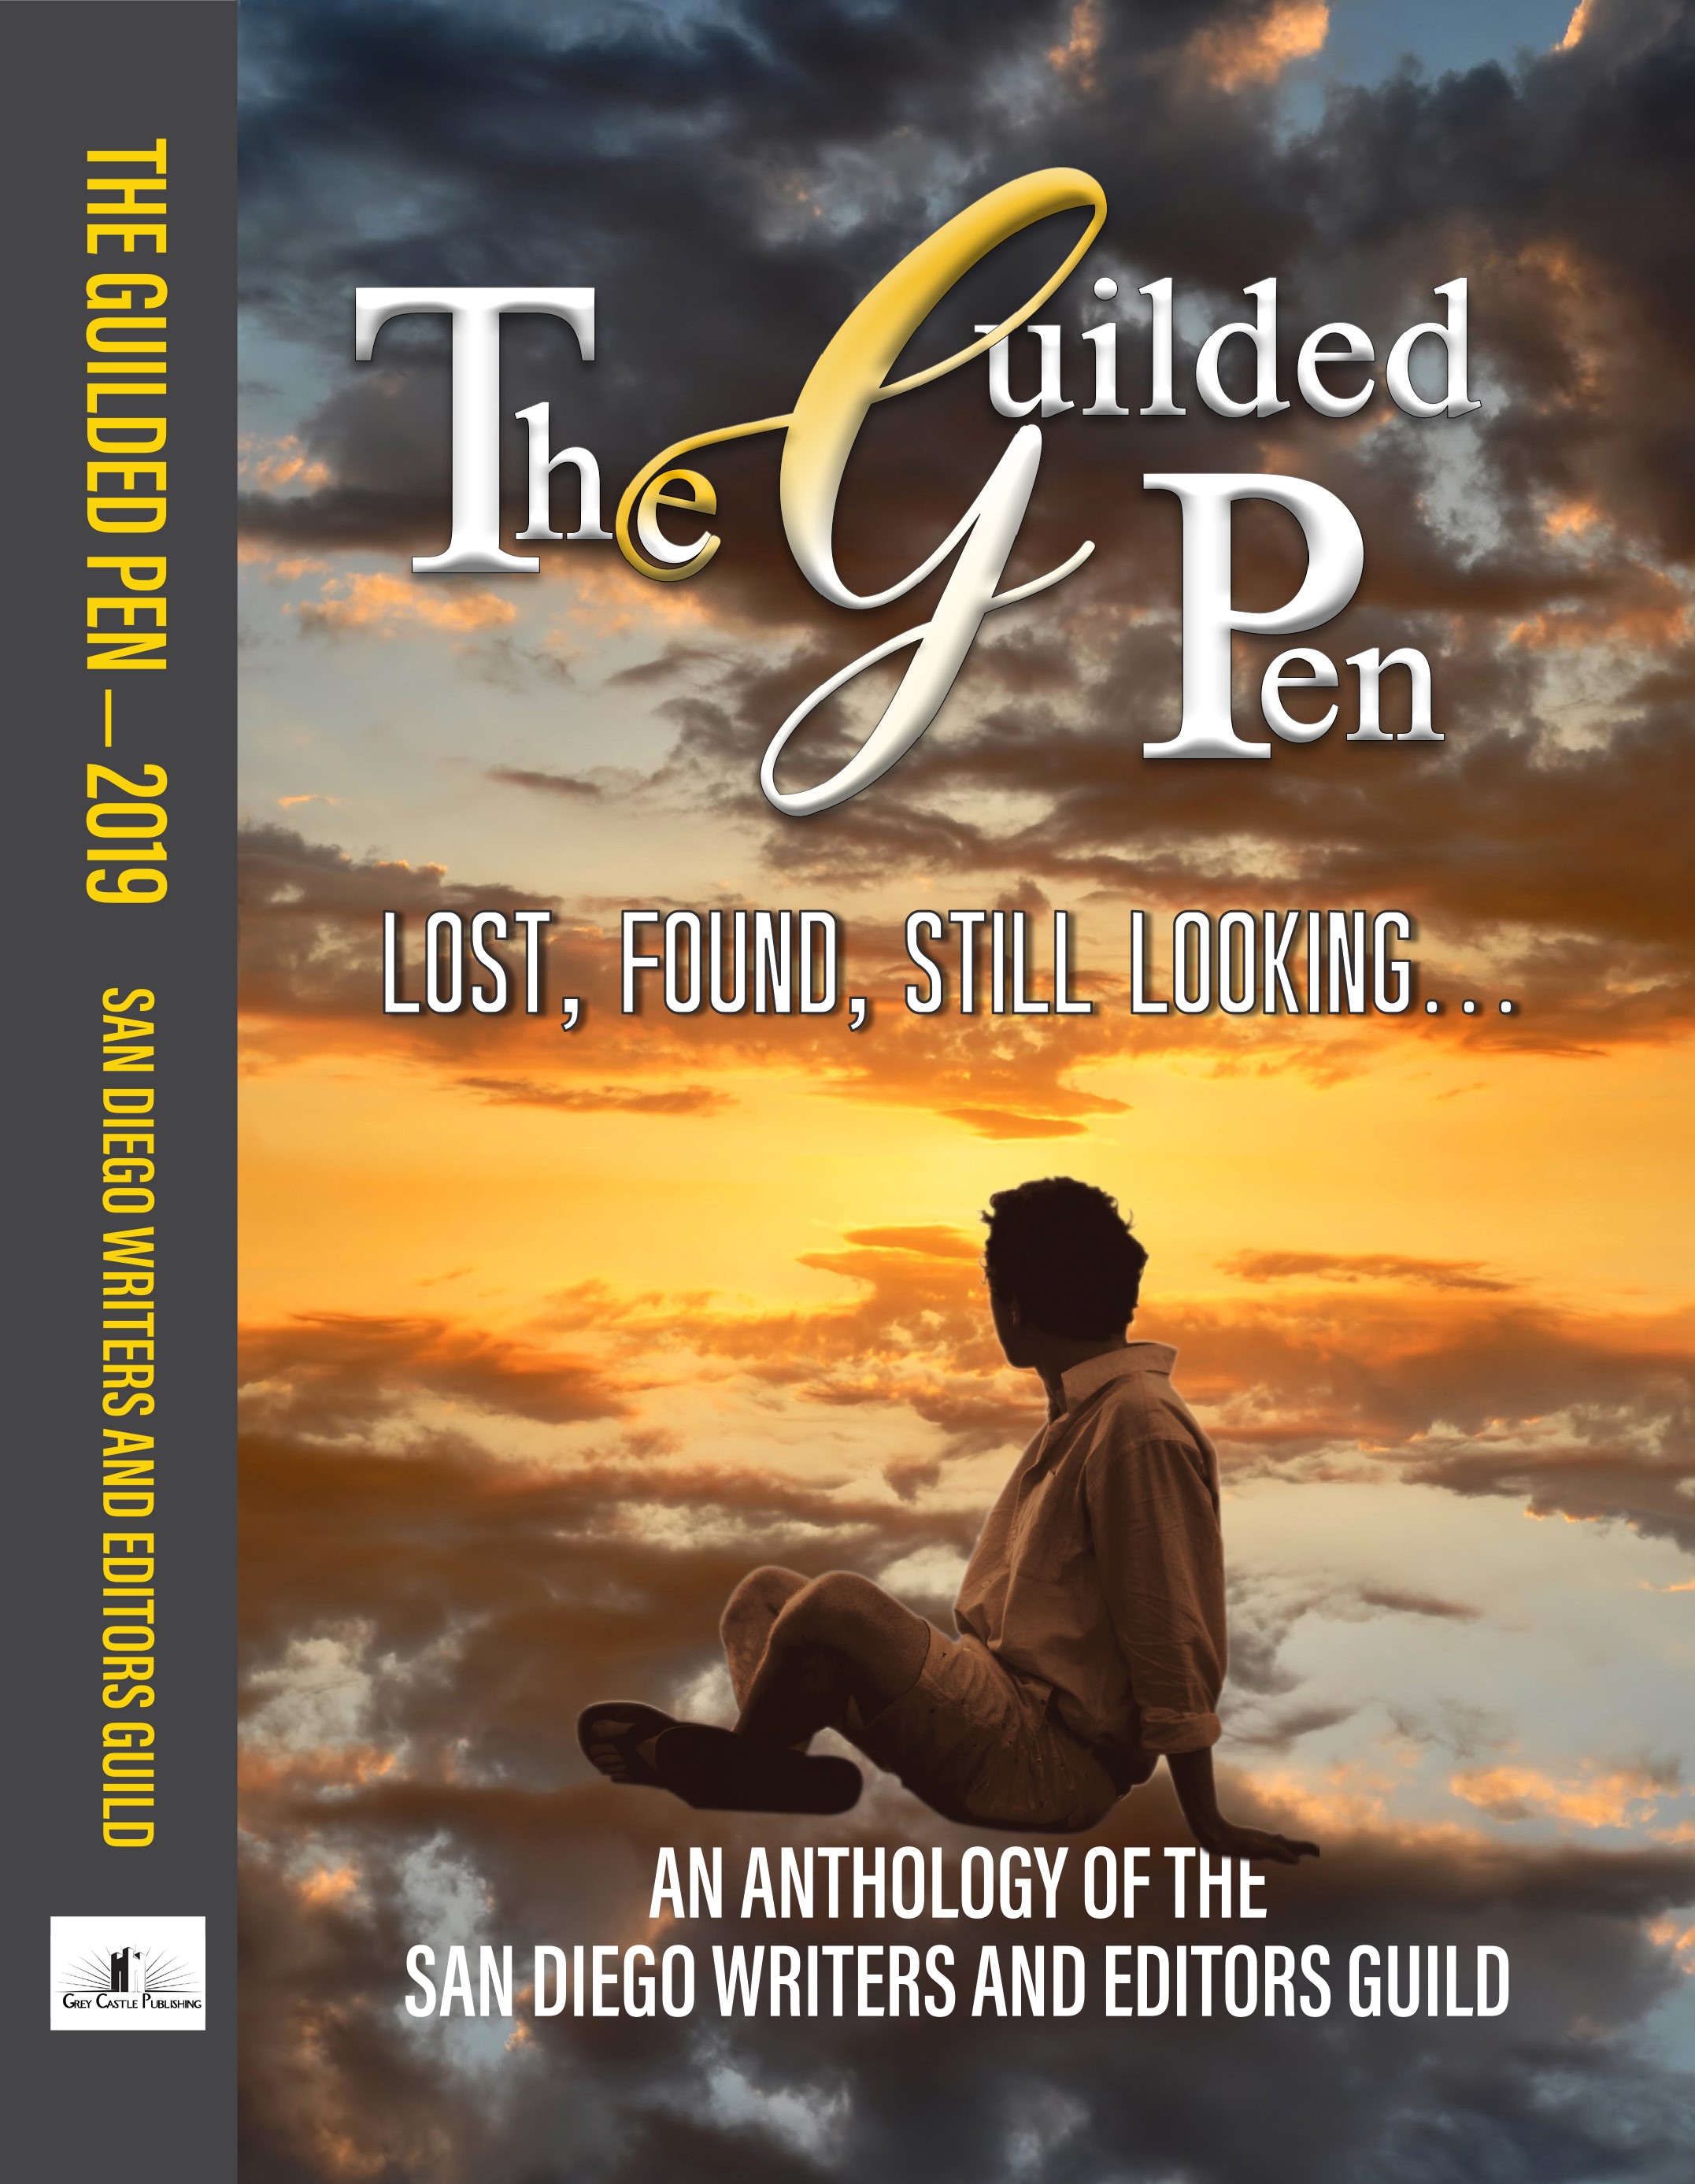 Book Cover image for The Guilded Pen - Lost, Found, Still Looking